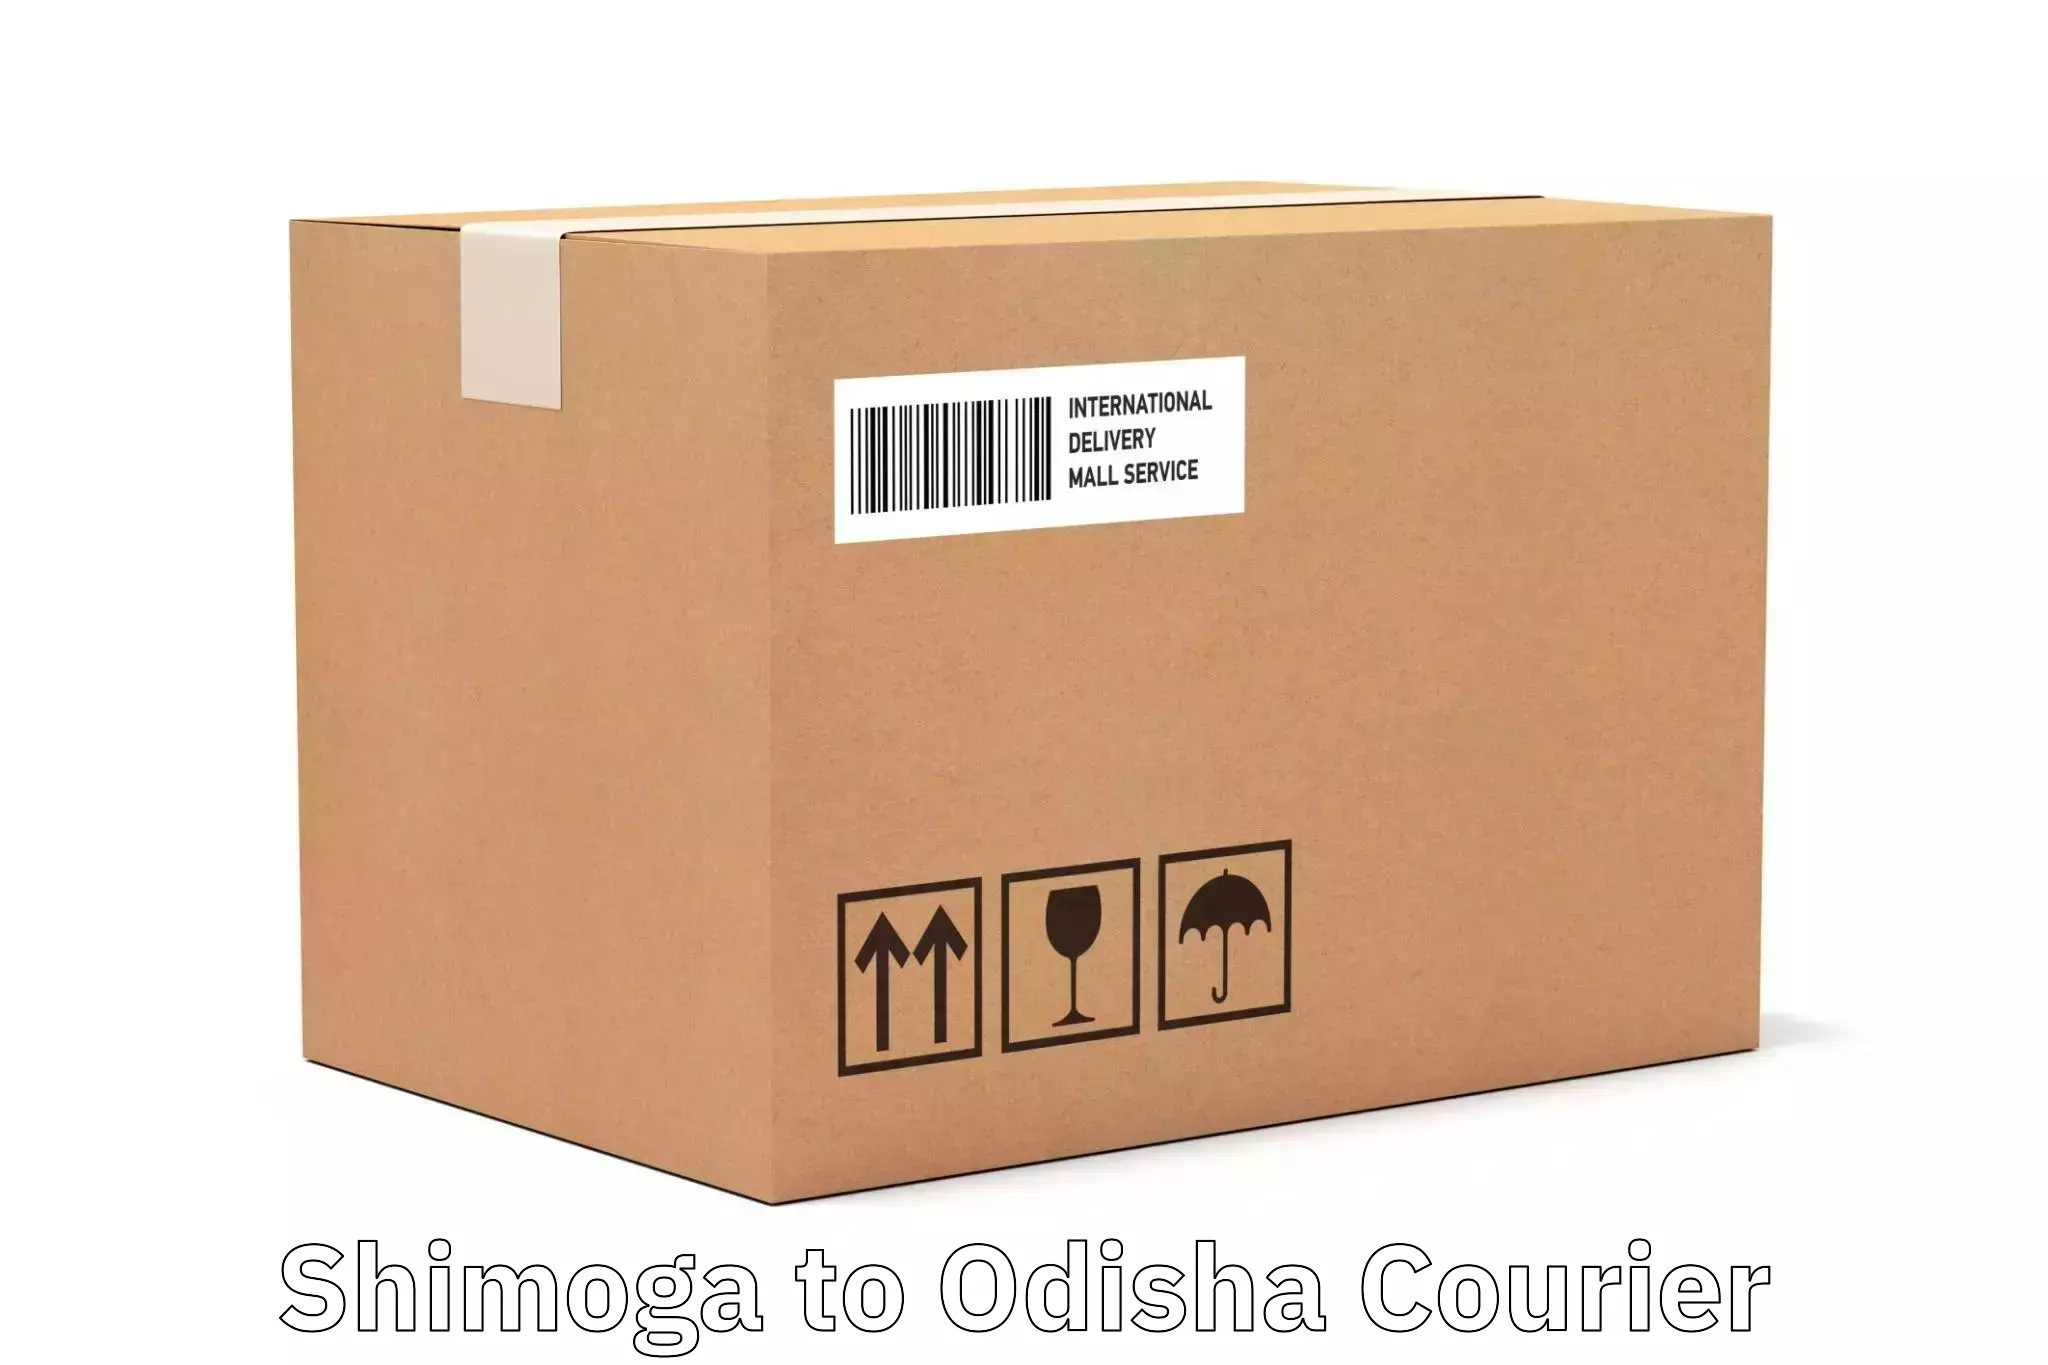 High-speed parcel service in Shimoga to Odisha